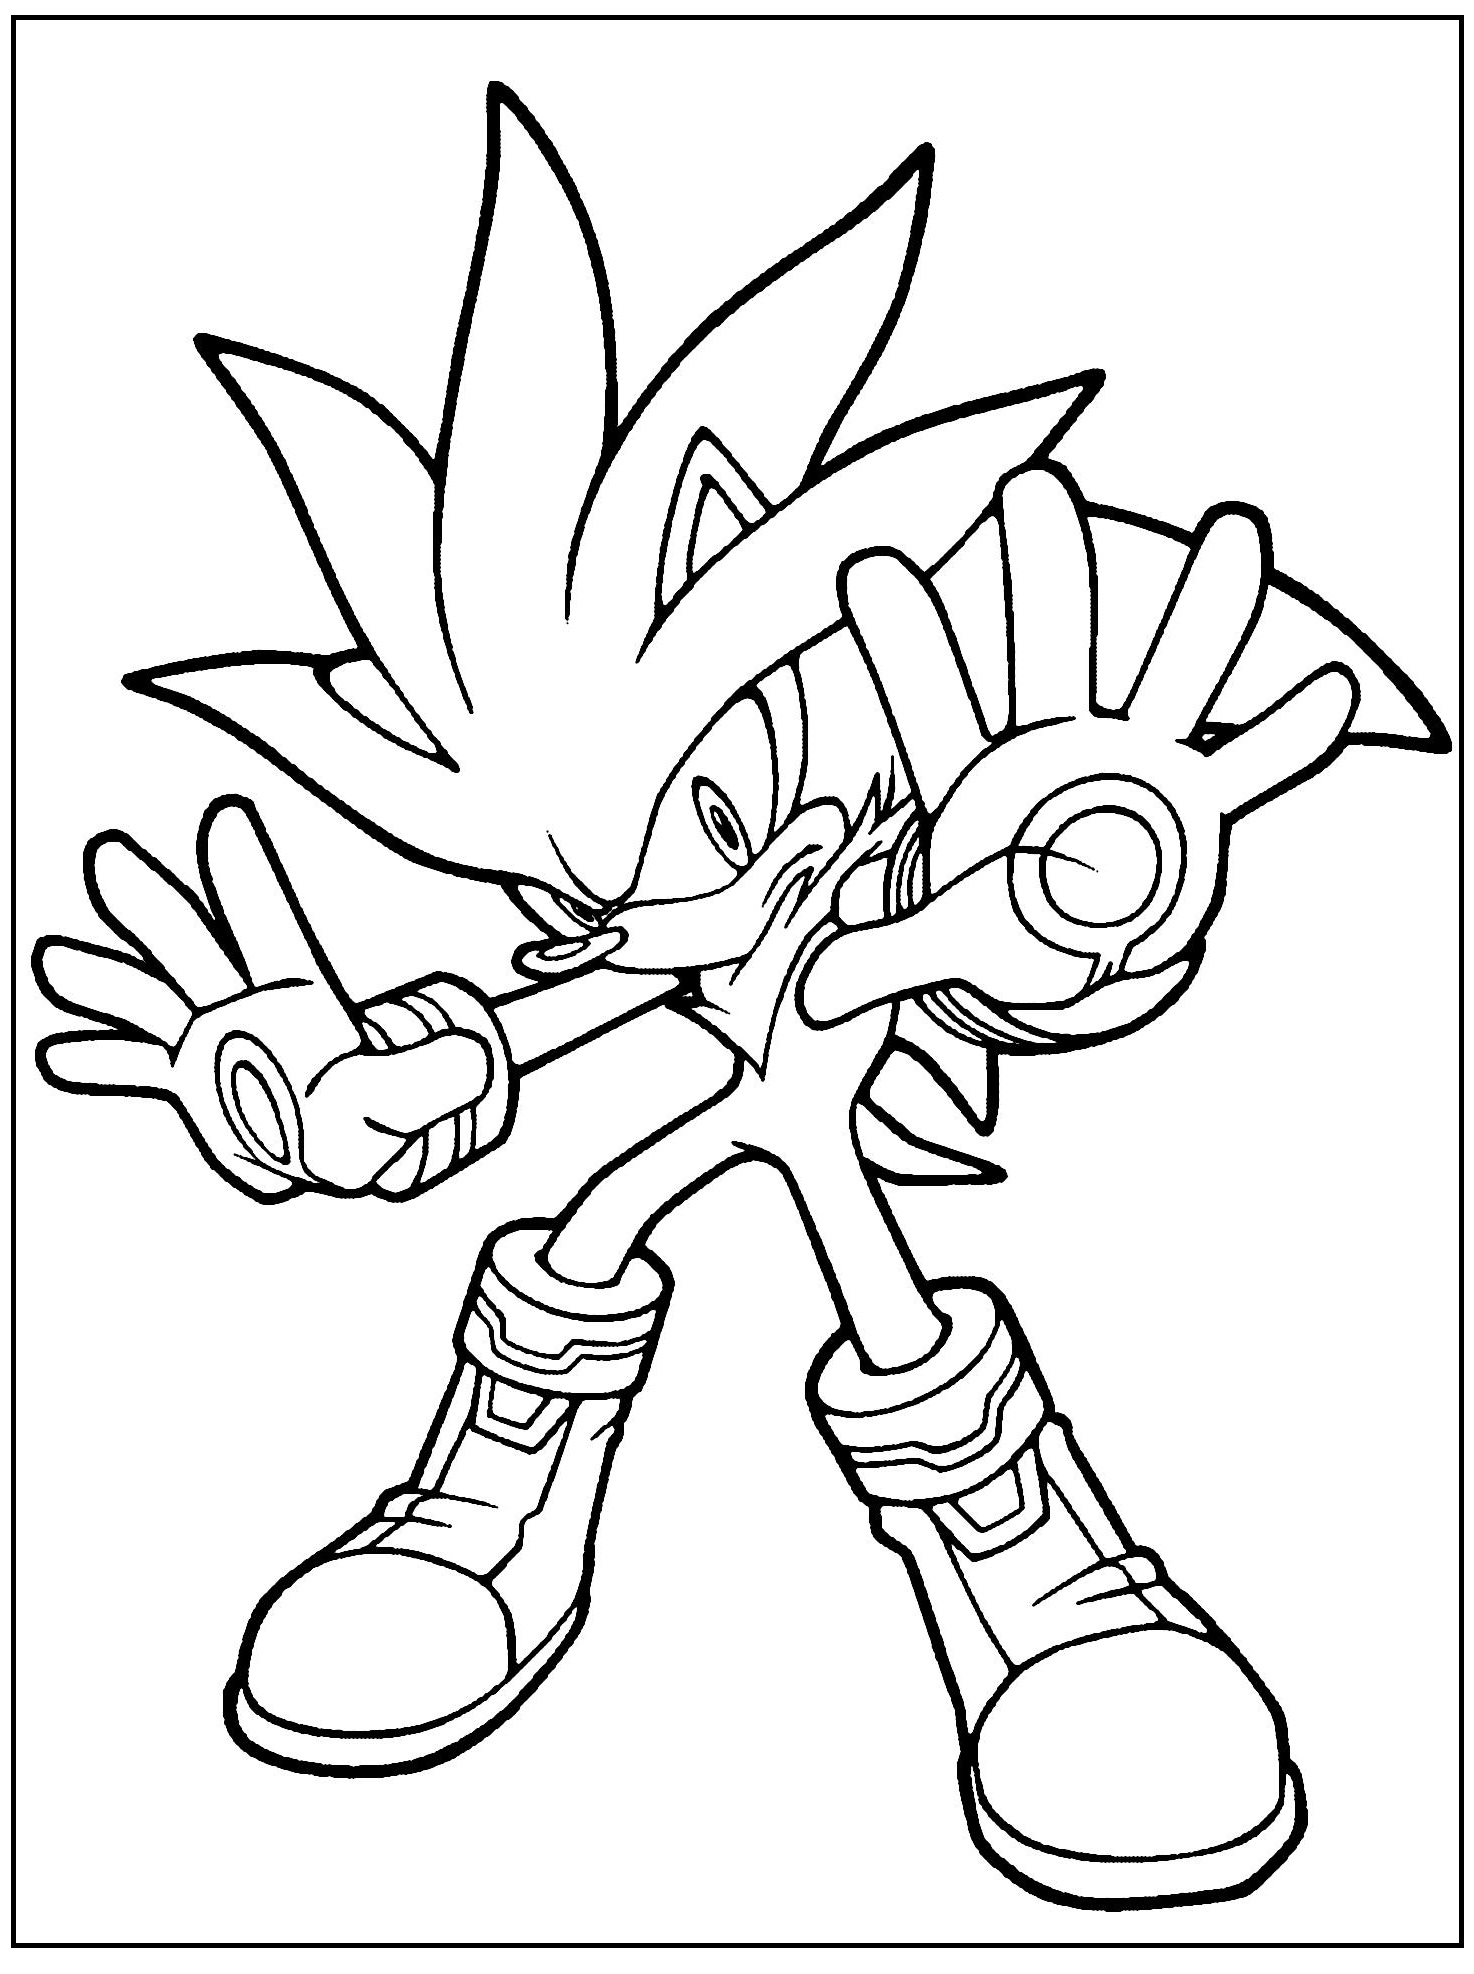 Super Silver The Hedgehog Coloring Pages Shadow The H - vrogue.co